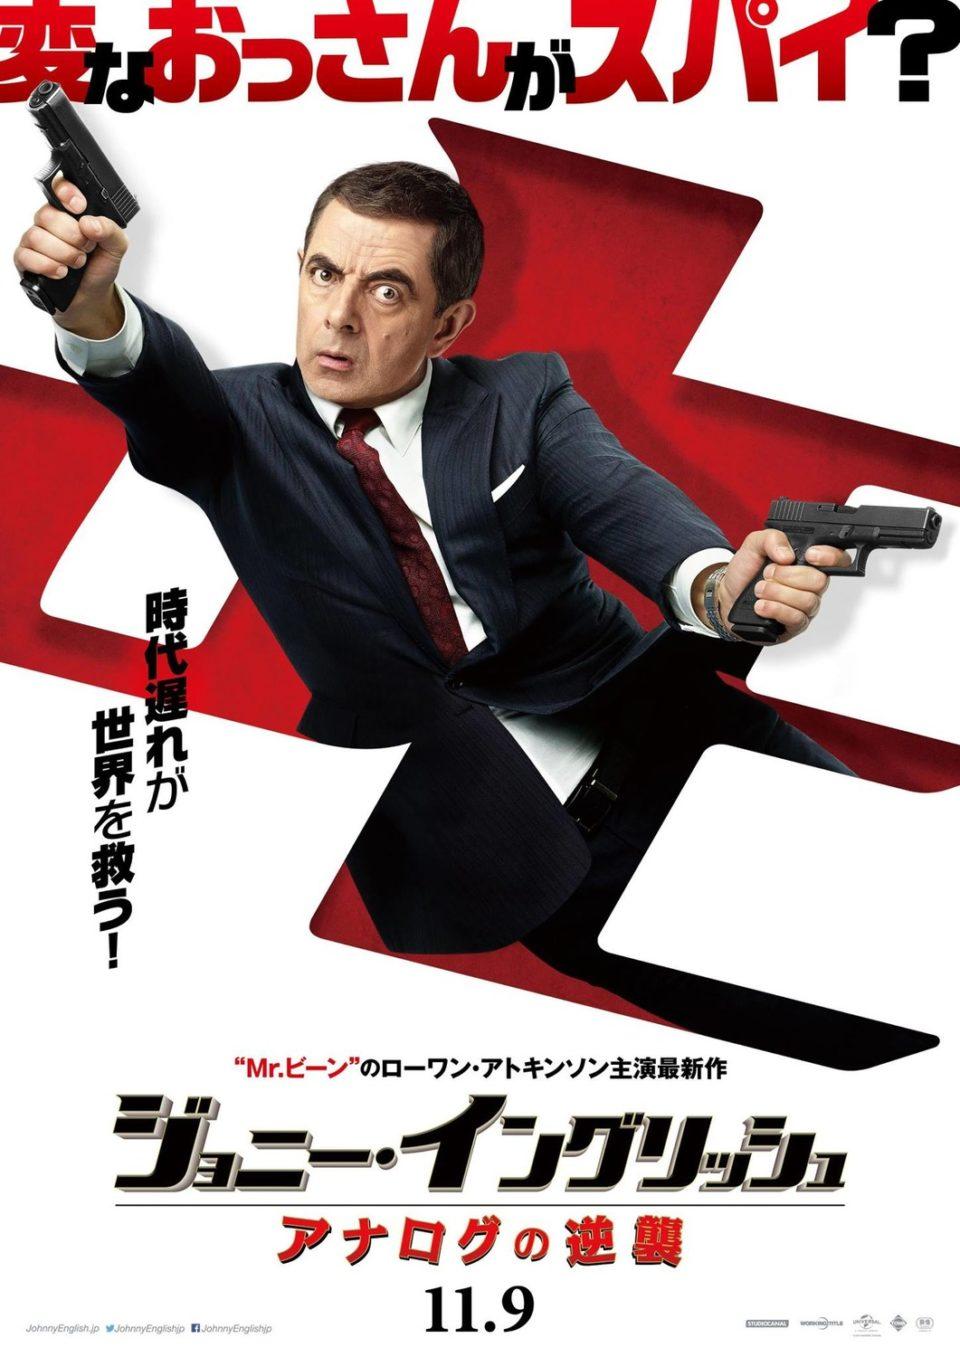 New Movie Posters for Johnny English Strikes Again